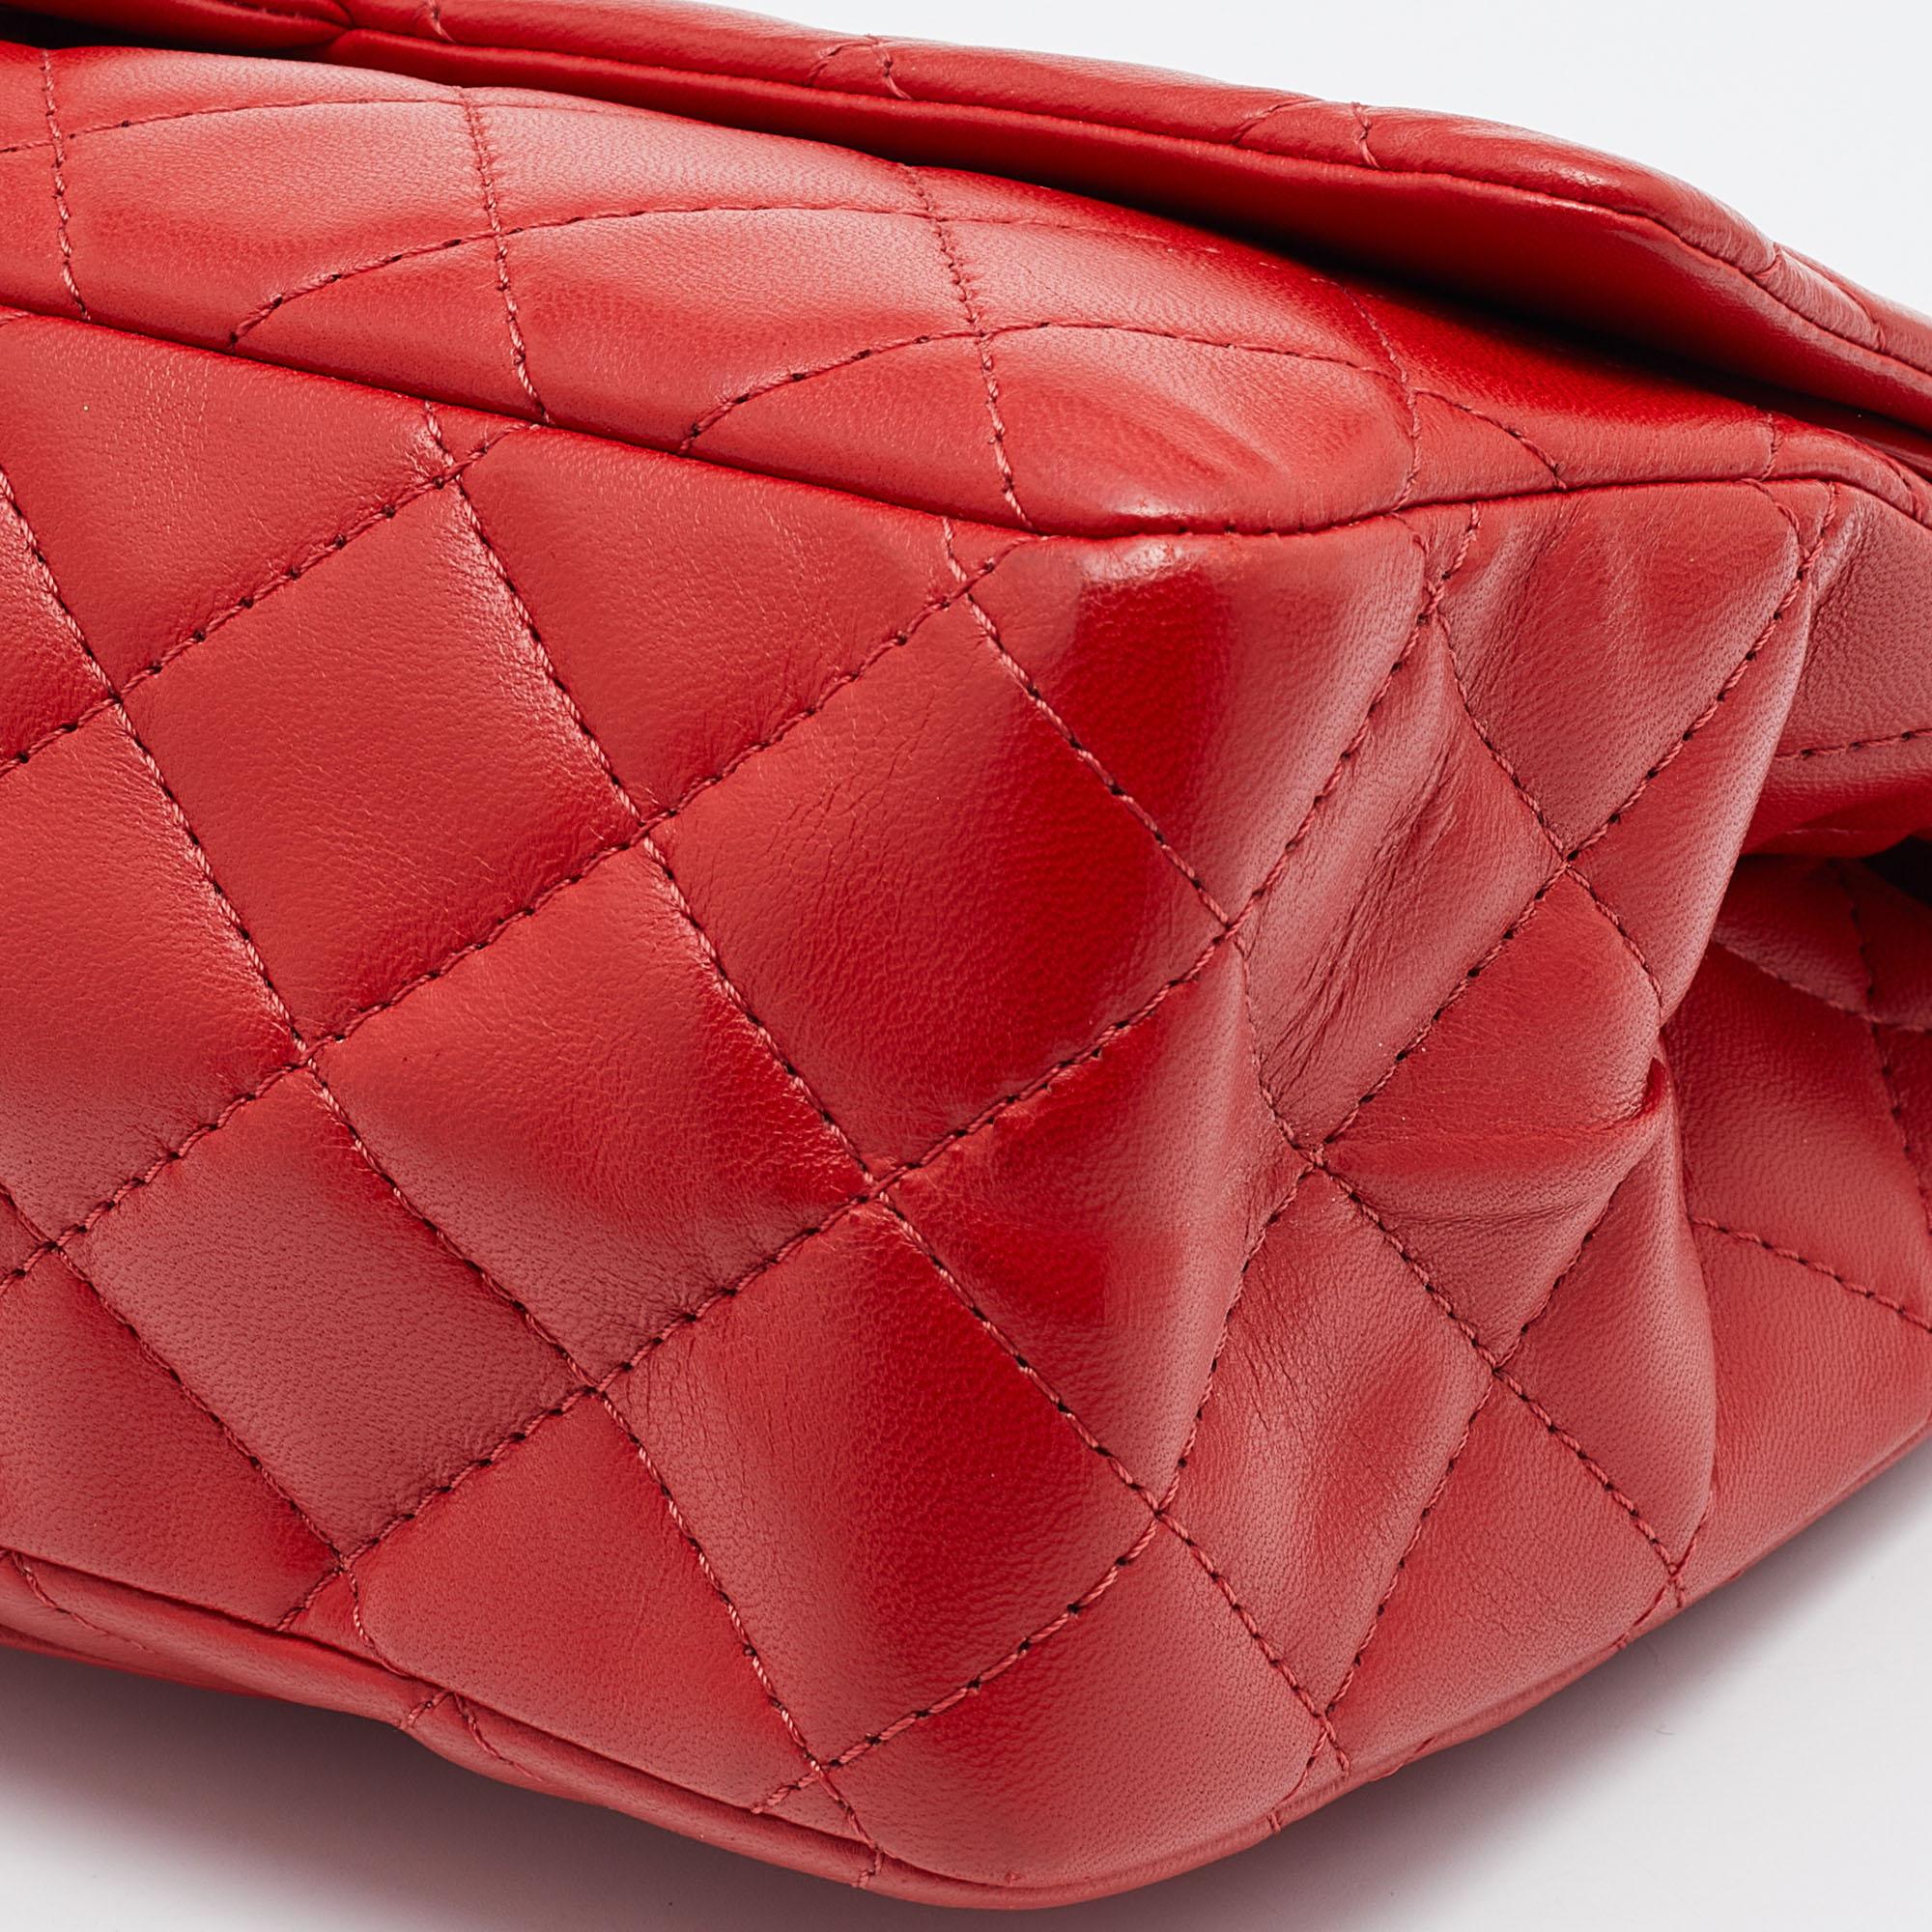 Chanel Red Lipstick Quilted Leather Reissue 2.55 Classic 226 Flap Bag 13